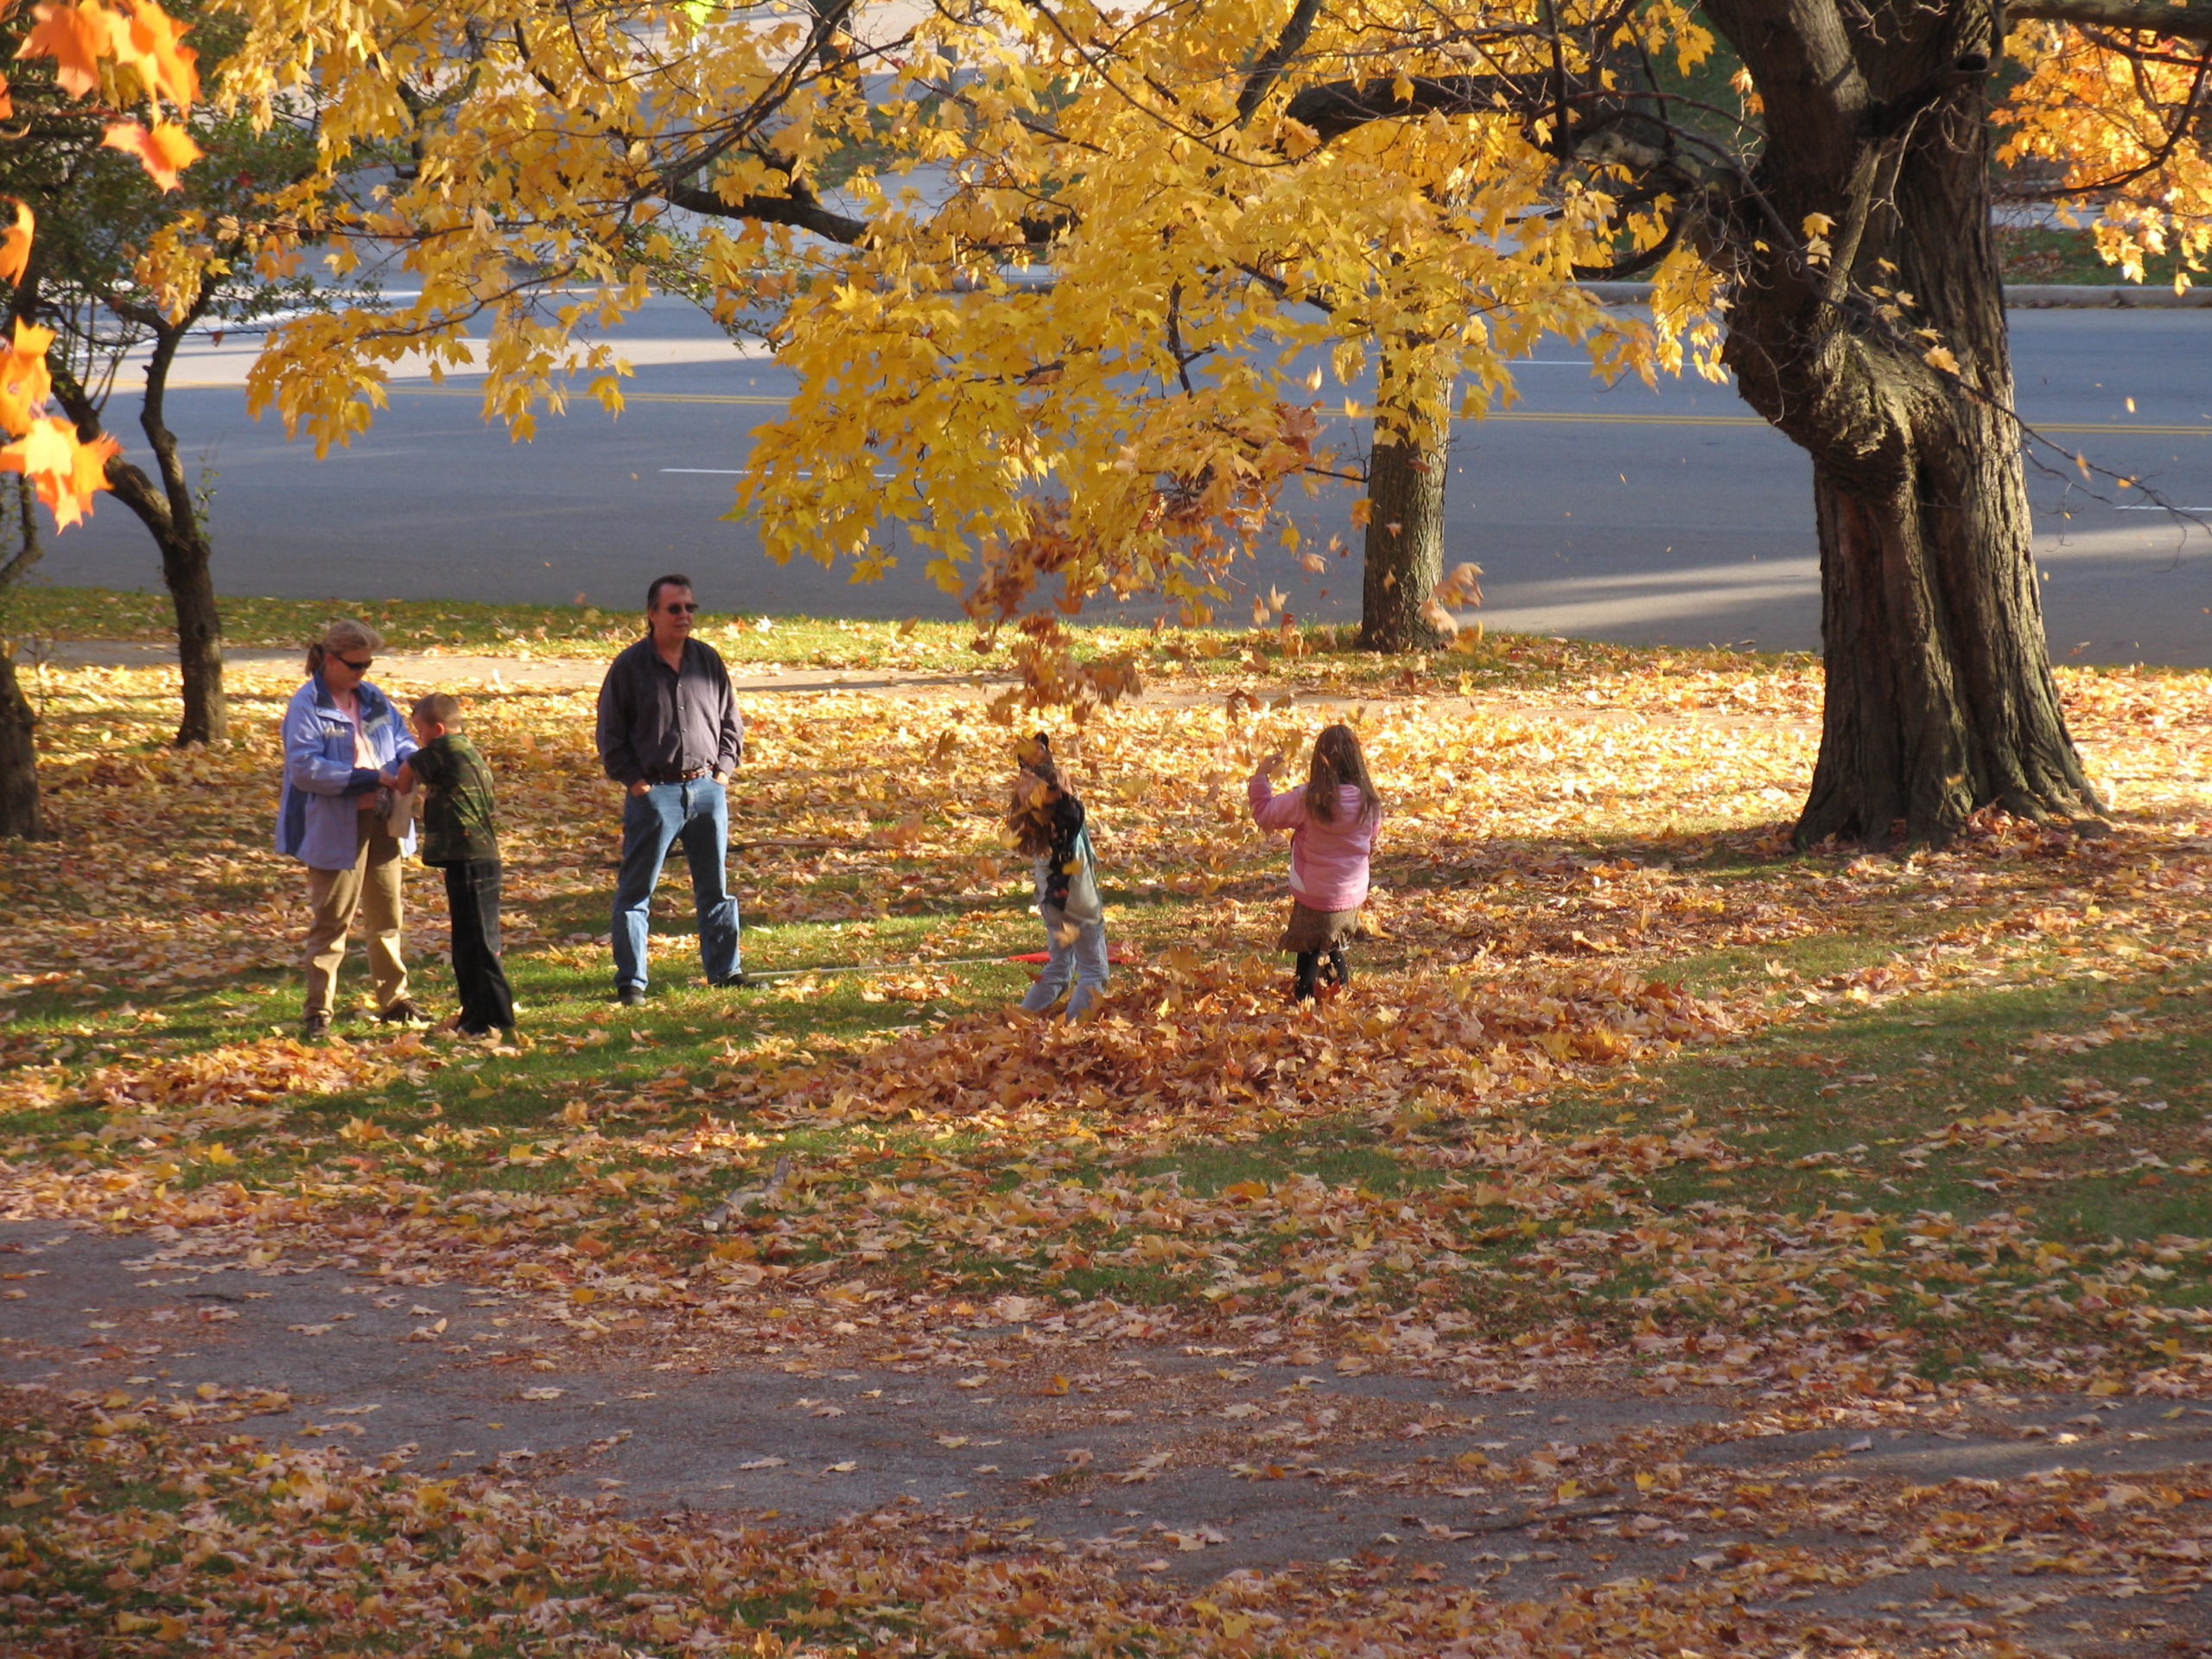 People walking through the park on a fall day